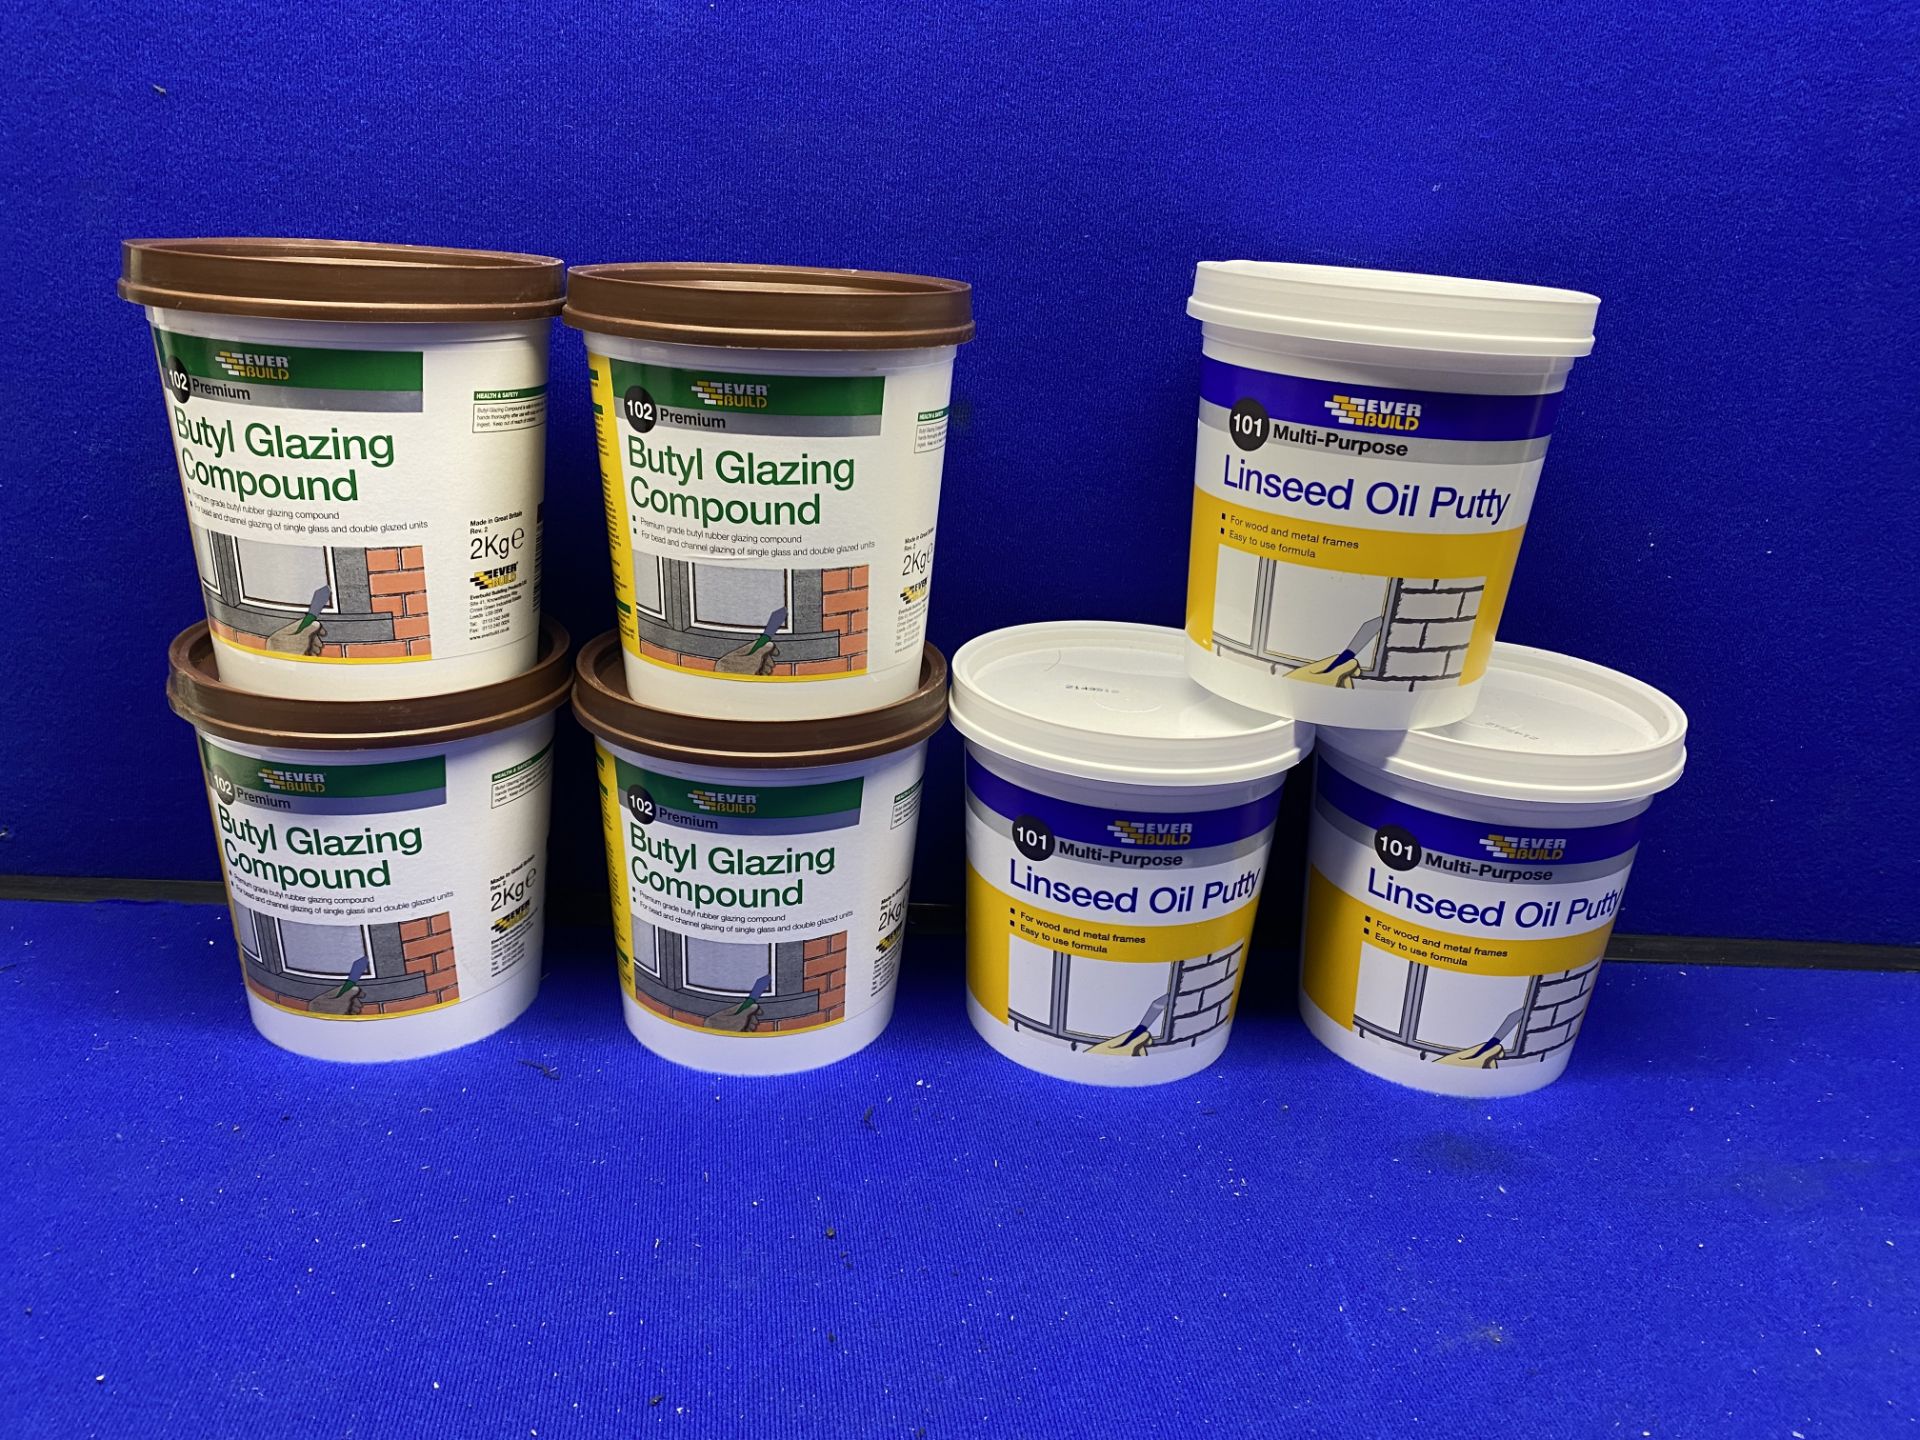 Mixed Lot Of 2kg Tubs Of Everbuild Butyl Glazing Compound & Linseed Oil Putty - See Description